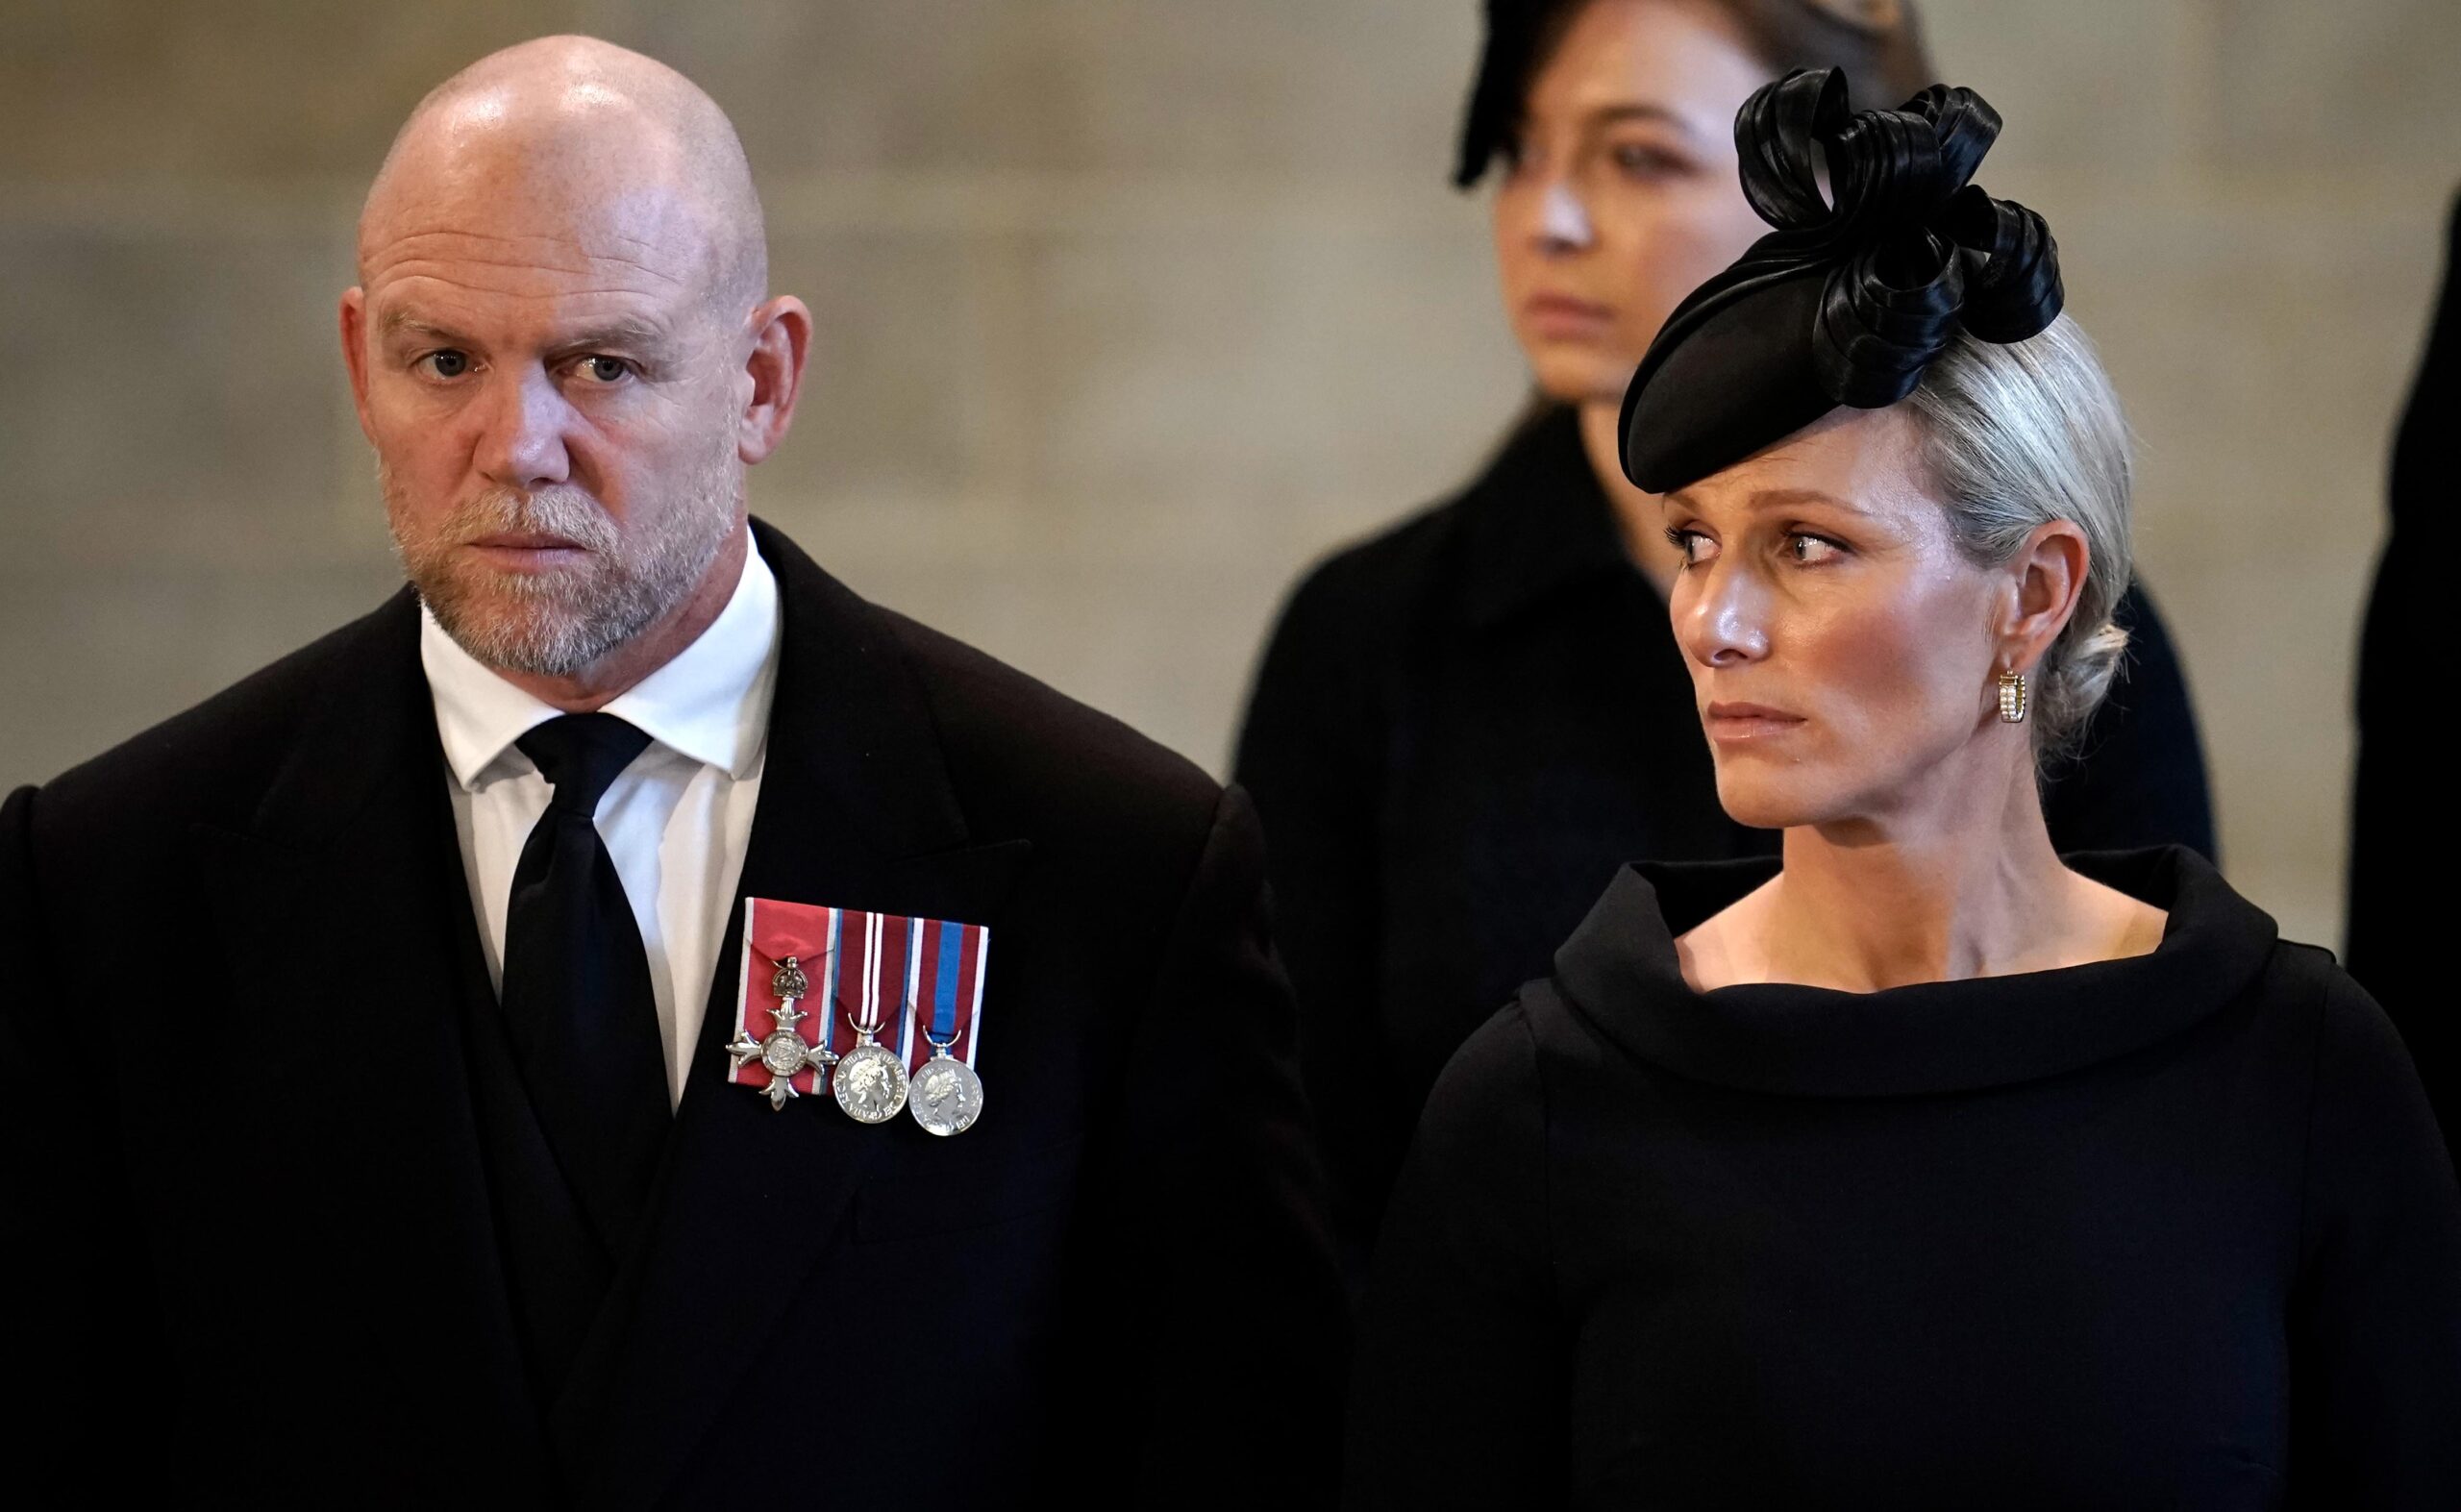 “What my wife, Zara, had to go through”: Mike Tindall opens up about the emotional toll of the Queen’s death